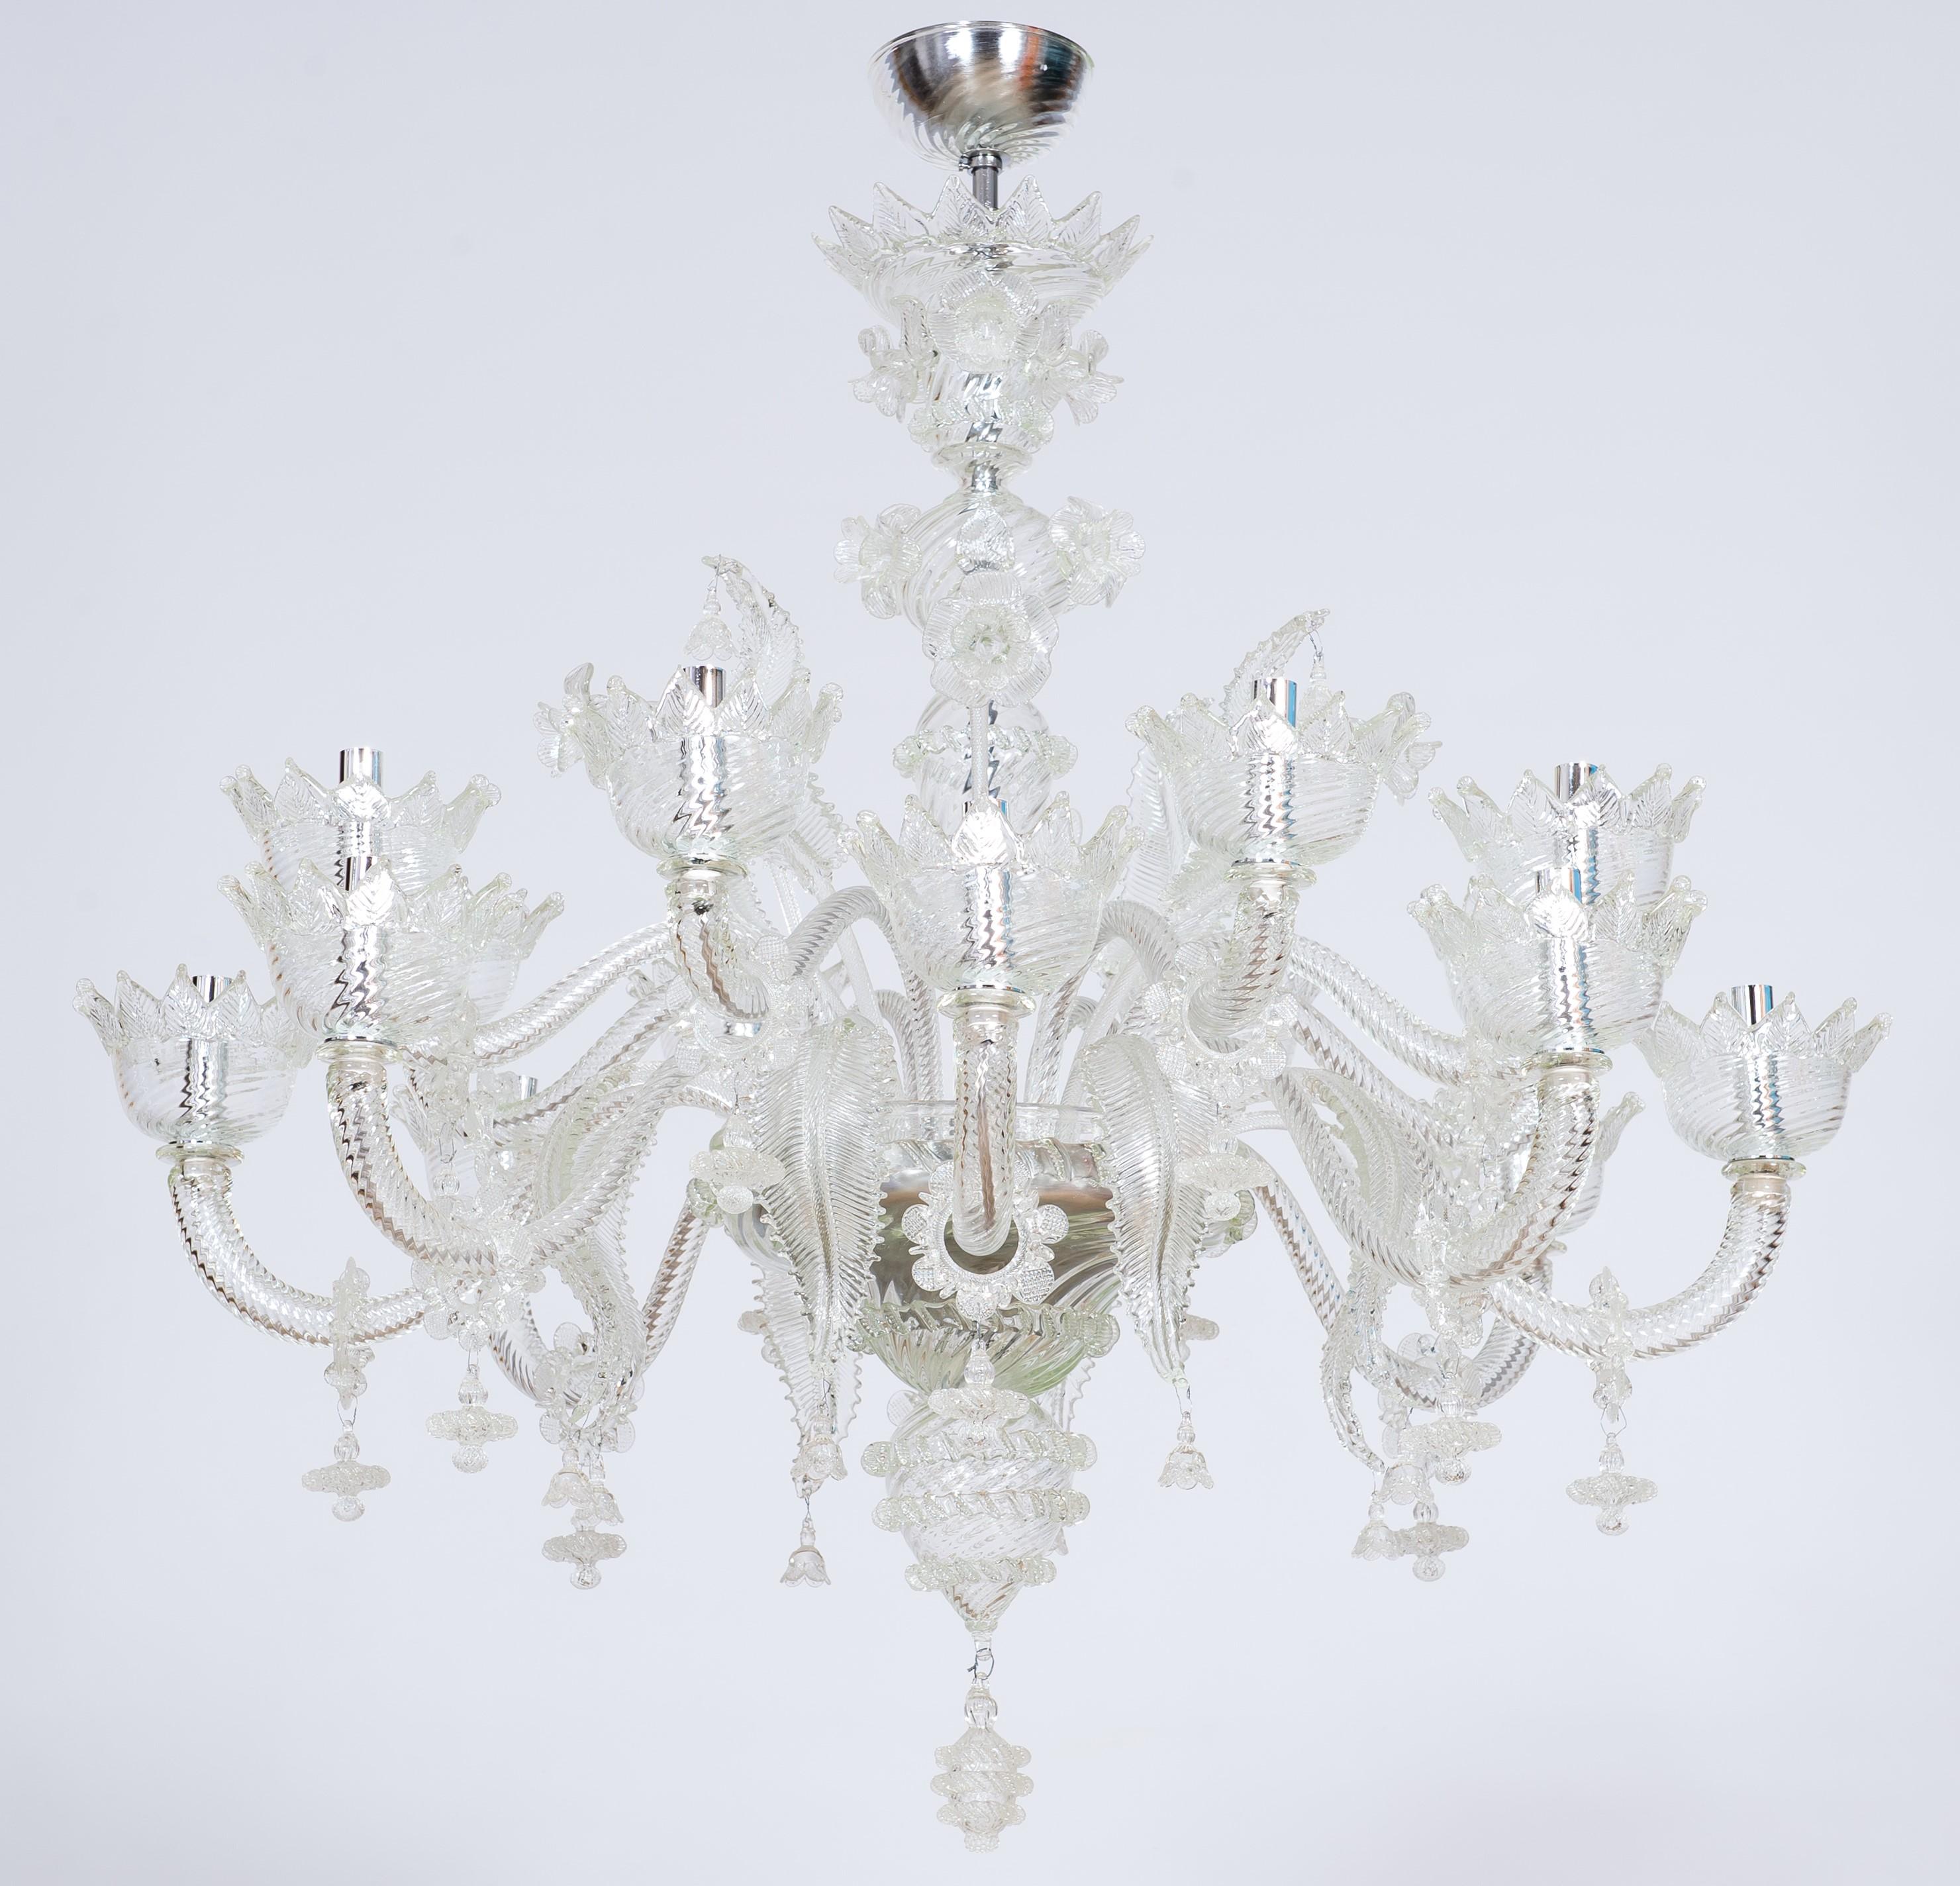 Transparent Venetian Murano glass chandelier with 16 lights, 21st century.
Superb example of the finest Venetian art, and of the best Murano glassblowing tradition. A total of 16 arms and a garden of leaves and flowers come out of the central base.